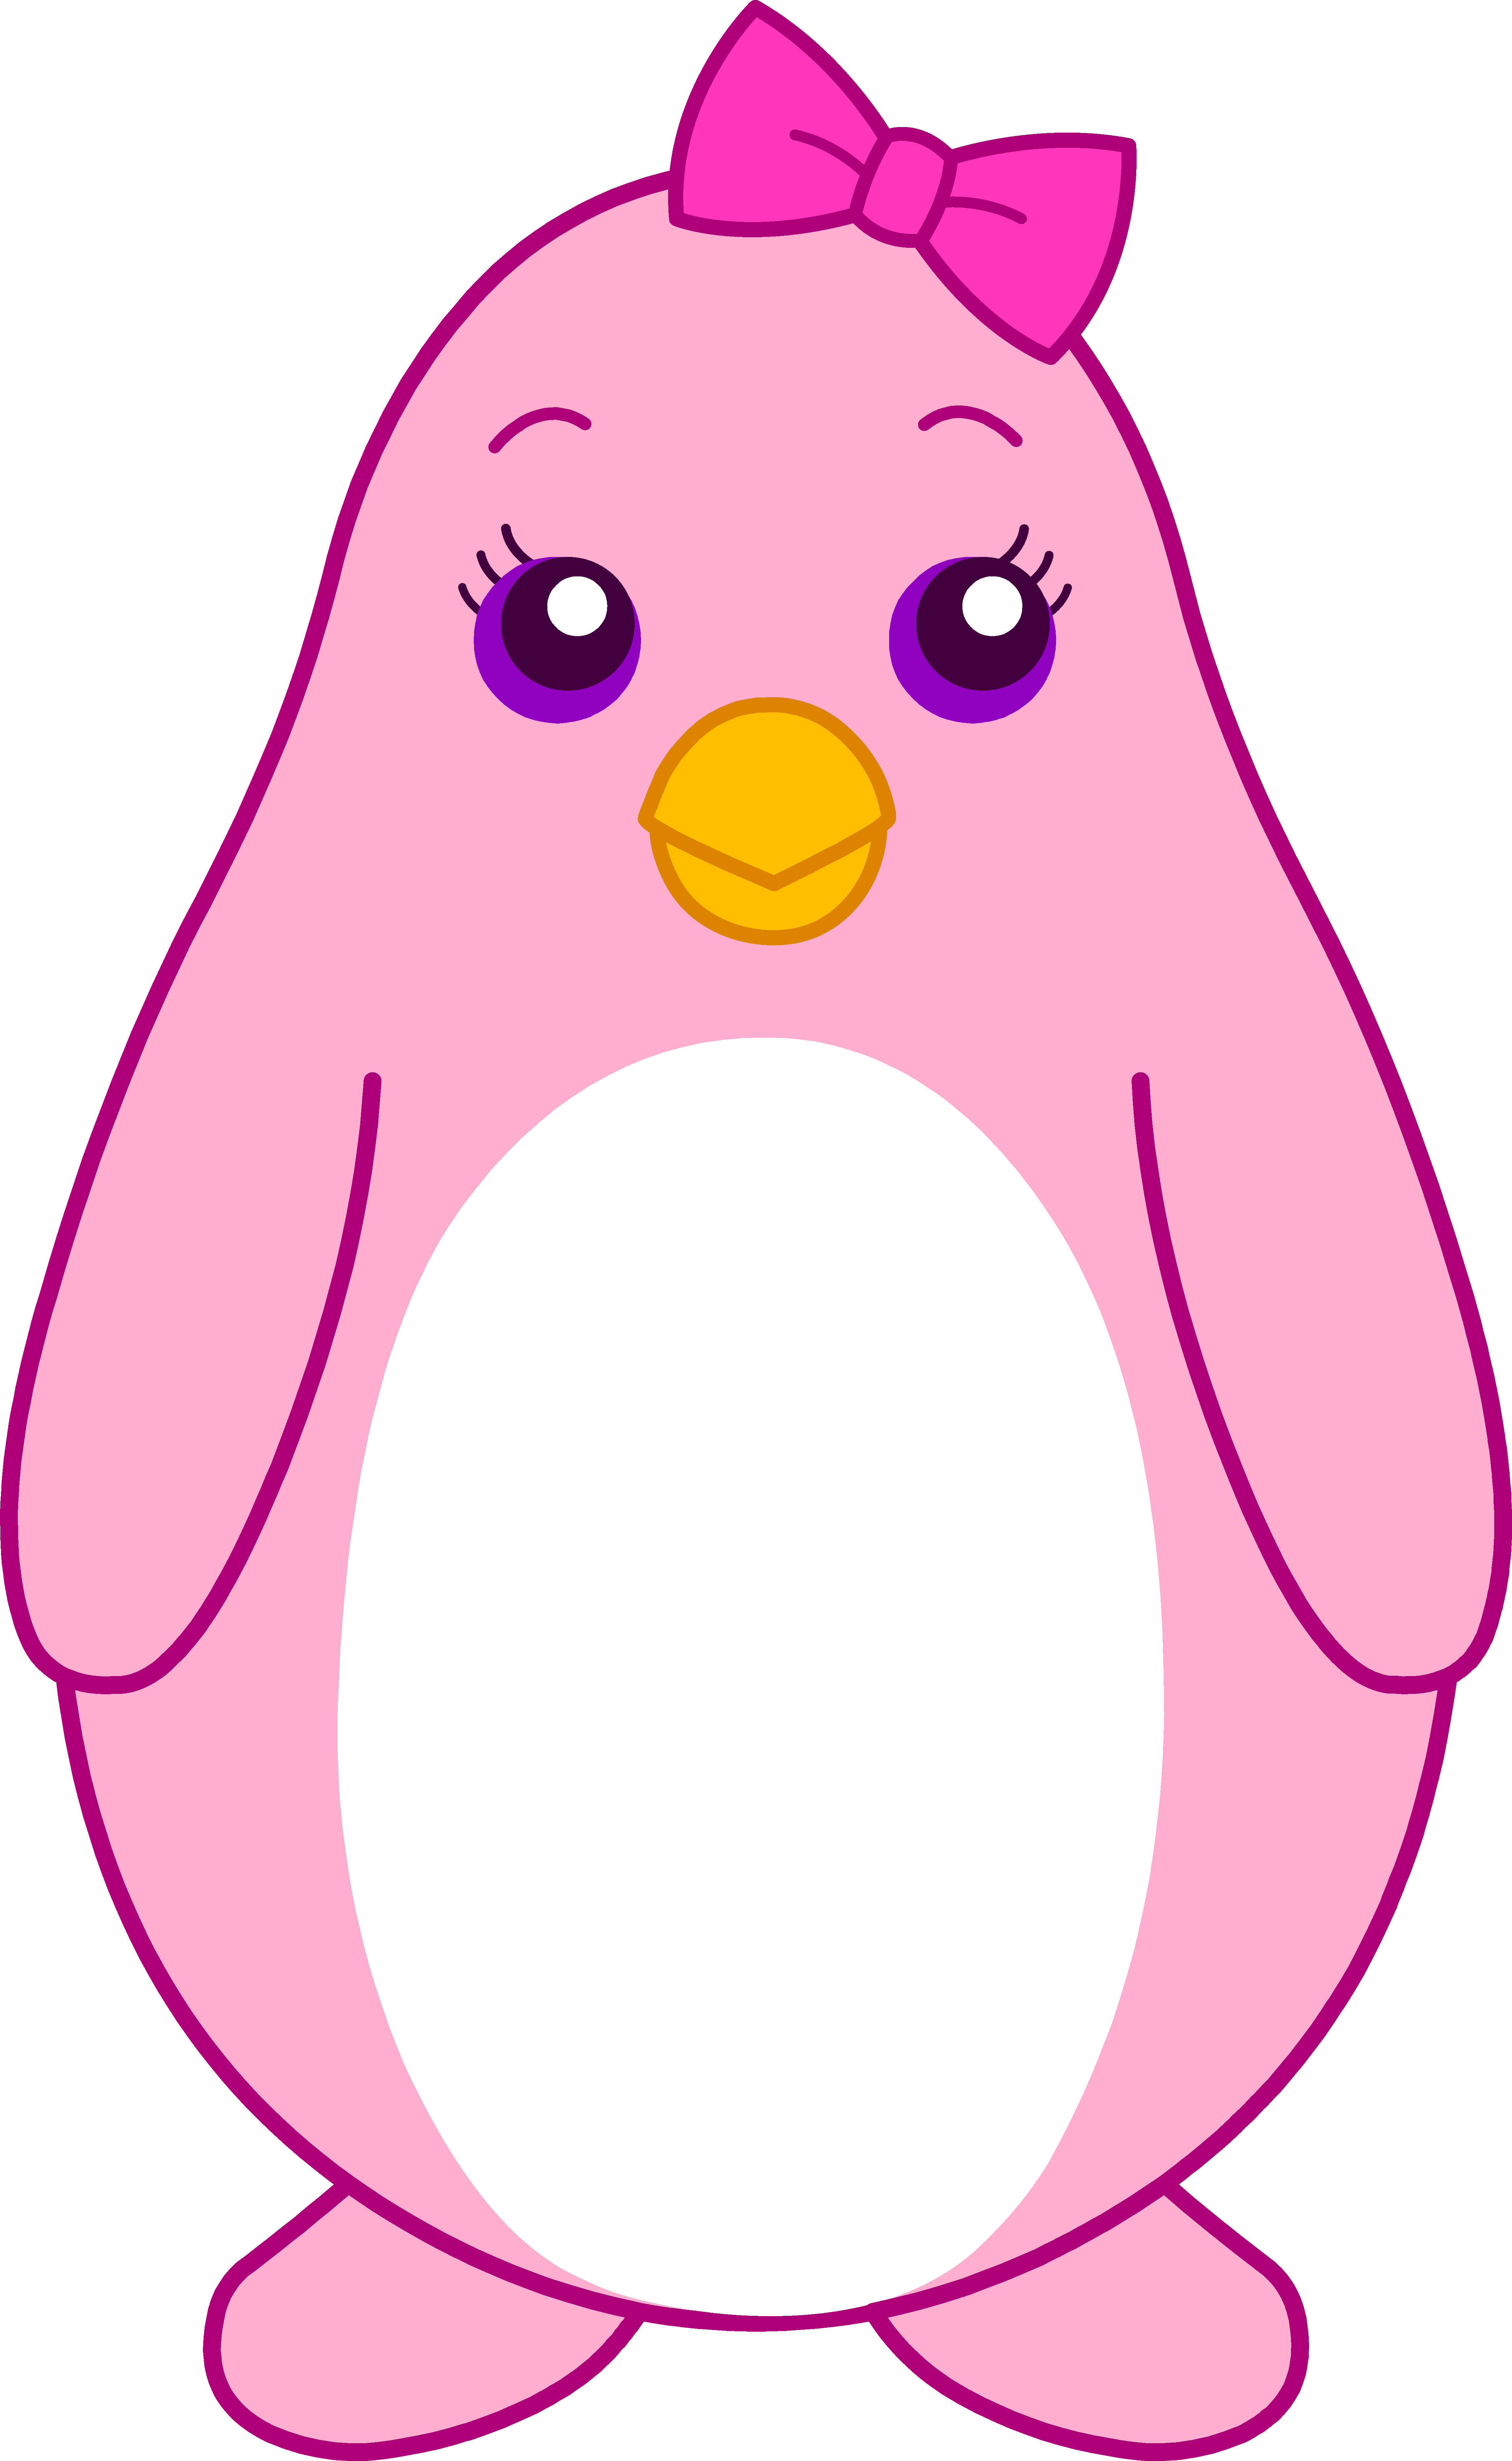 Animated penguin clip art. Dictionary clipart reference